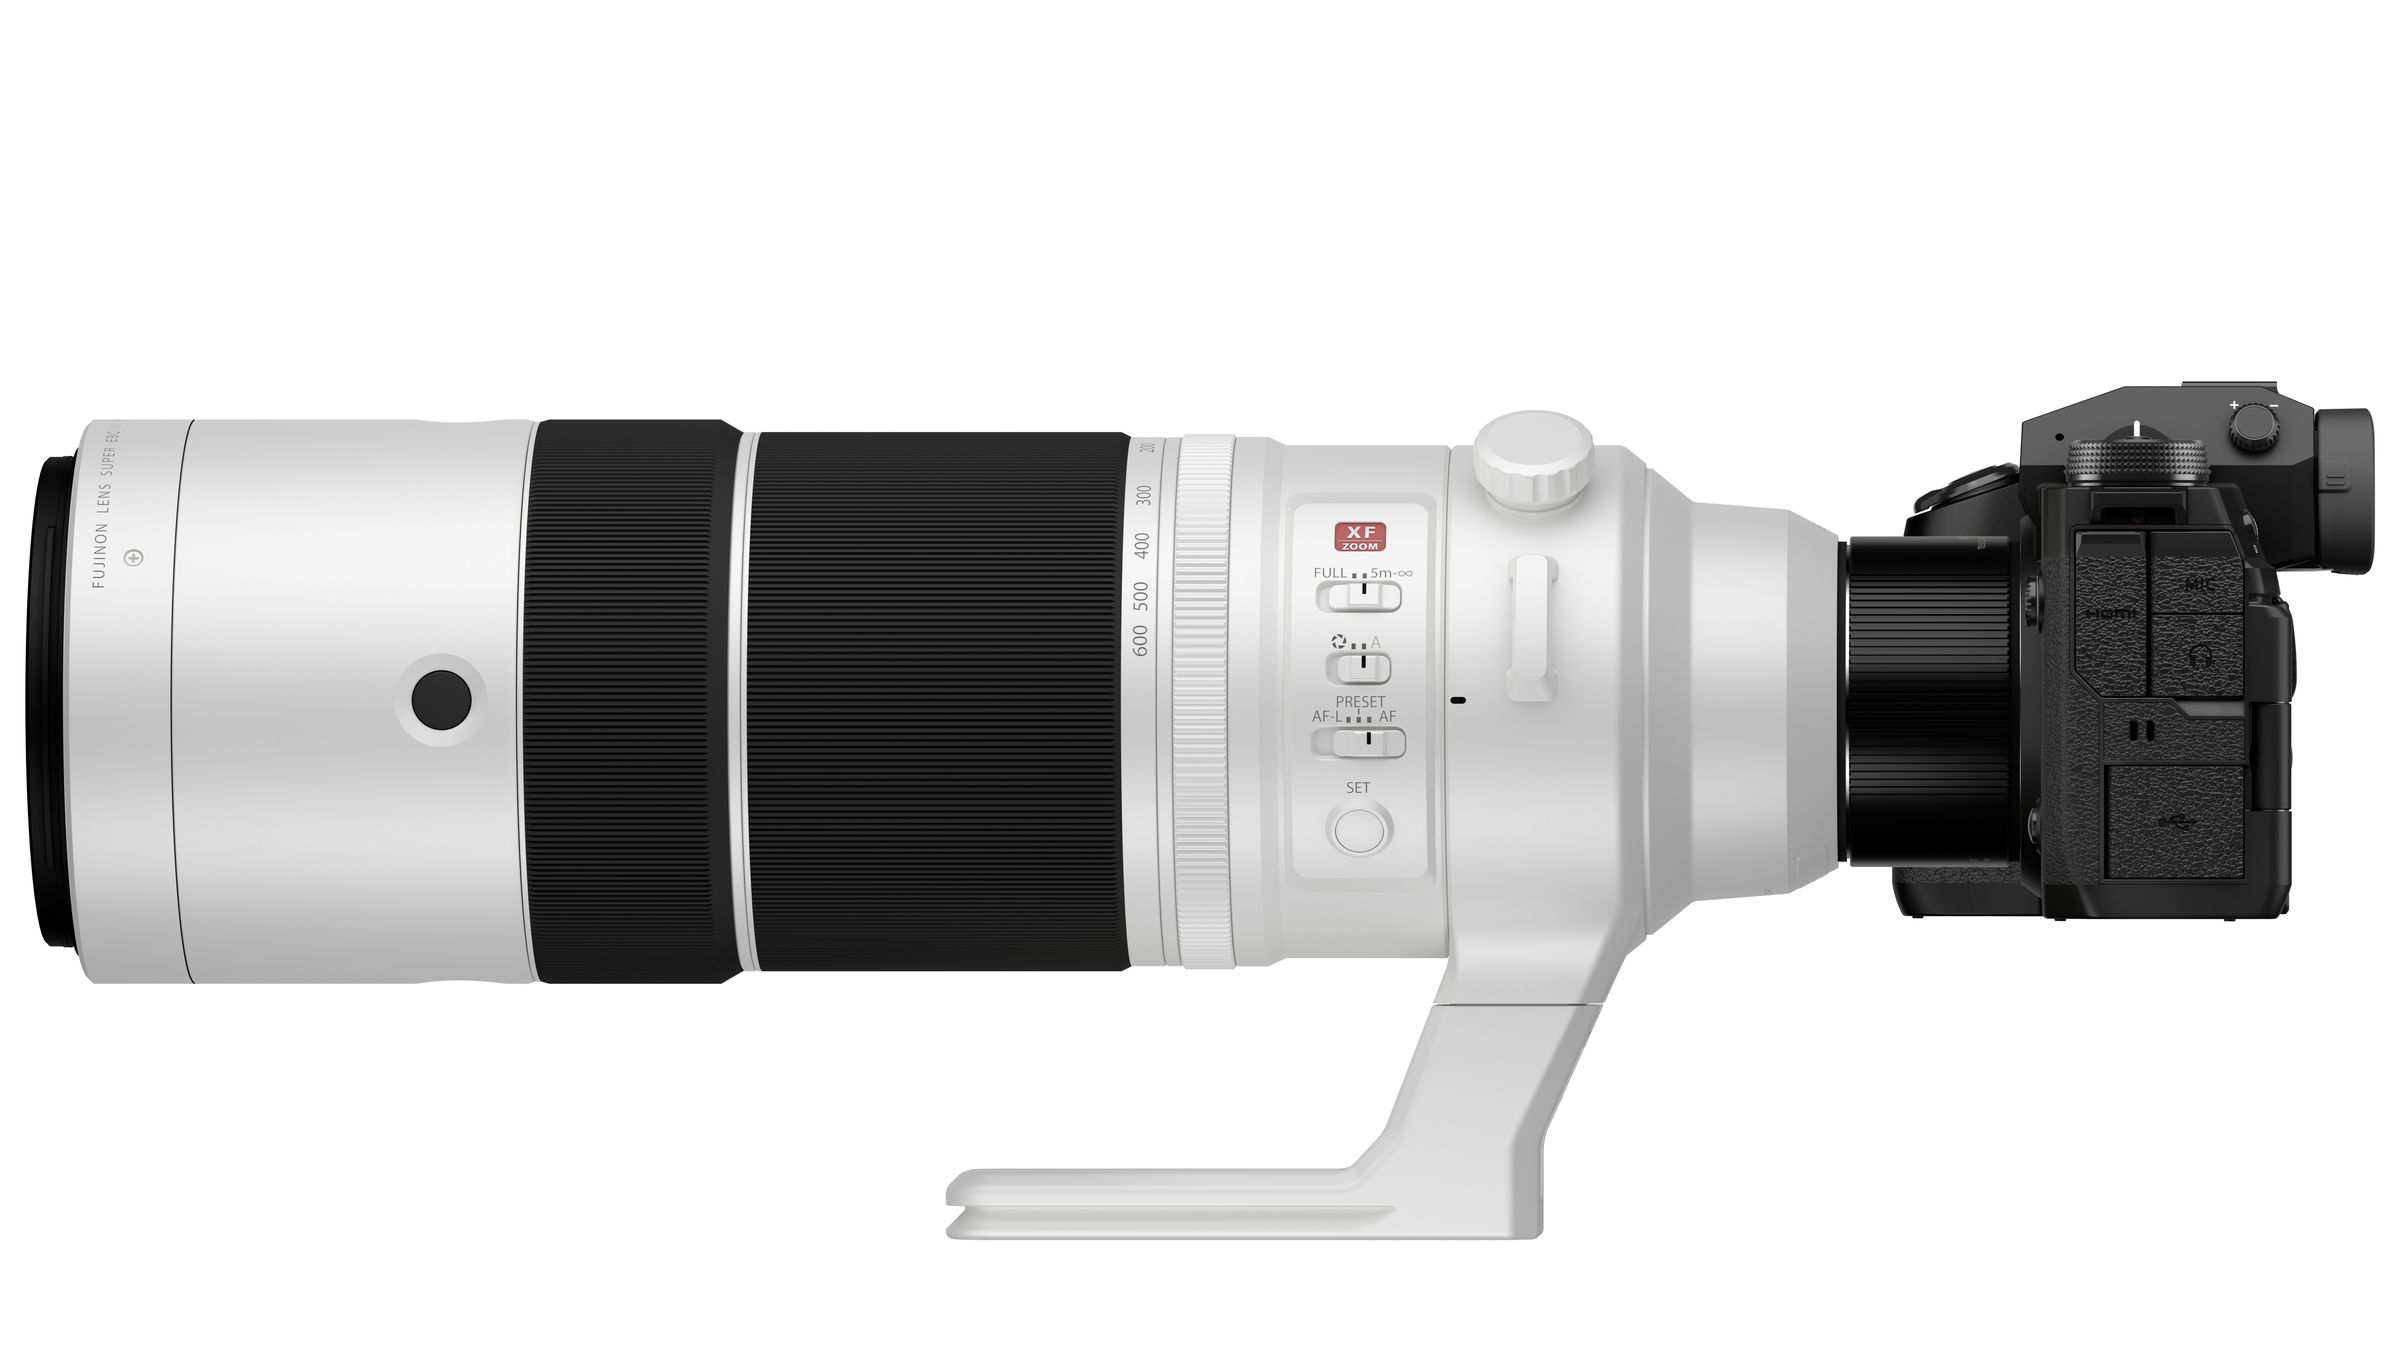 The 150-600mm is the longest telephoto lens of the X-line, and it works with a teleconverter (pictured here) to reach a full-frame equivalent of 1800mm.